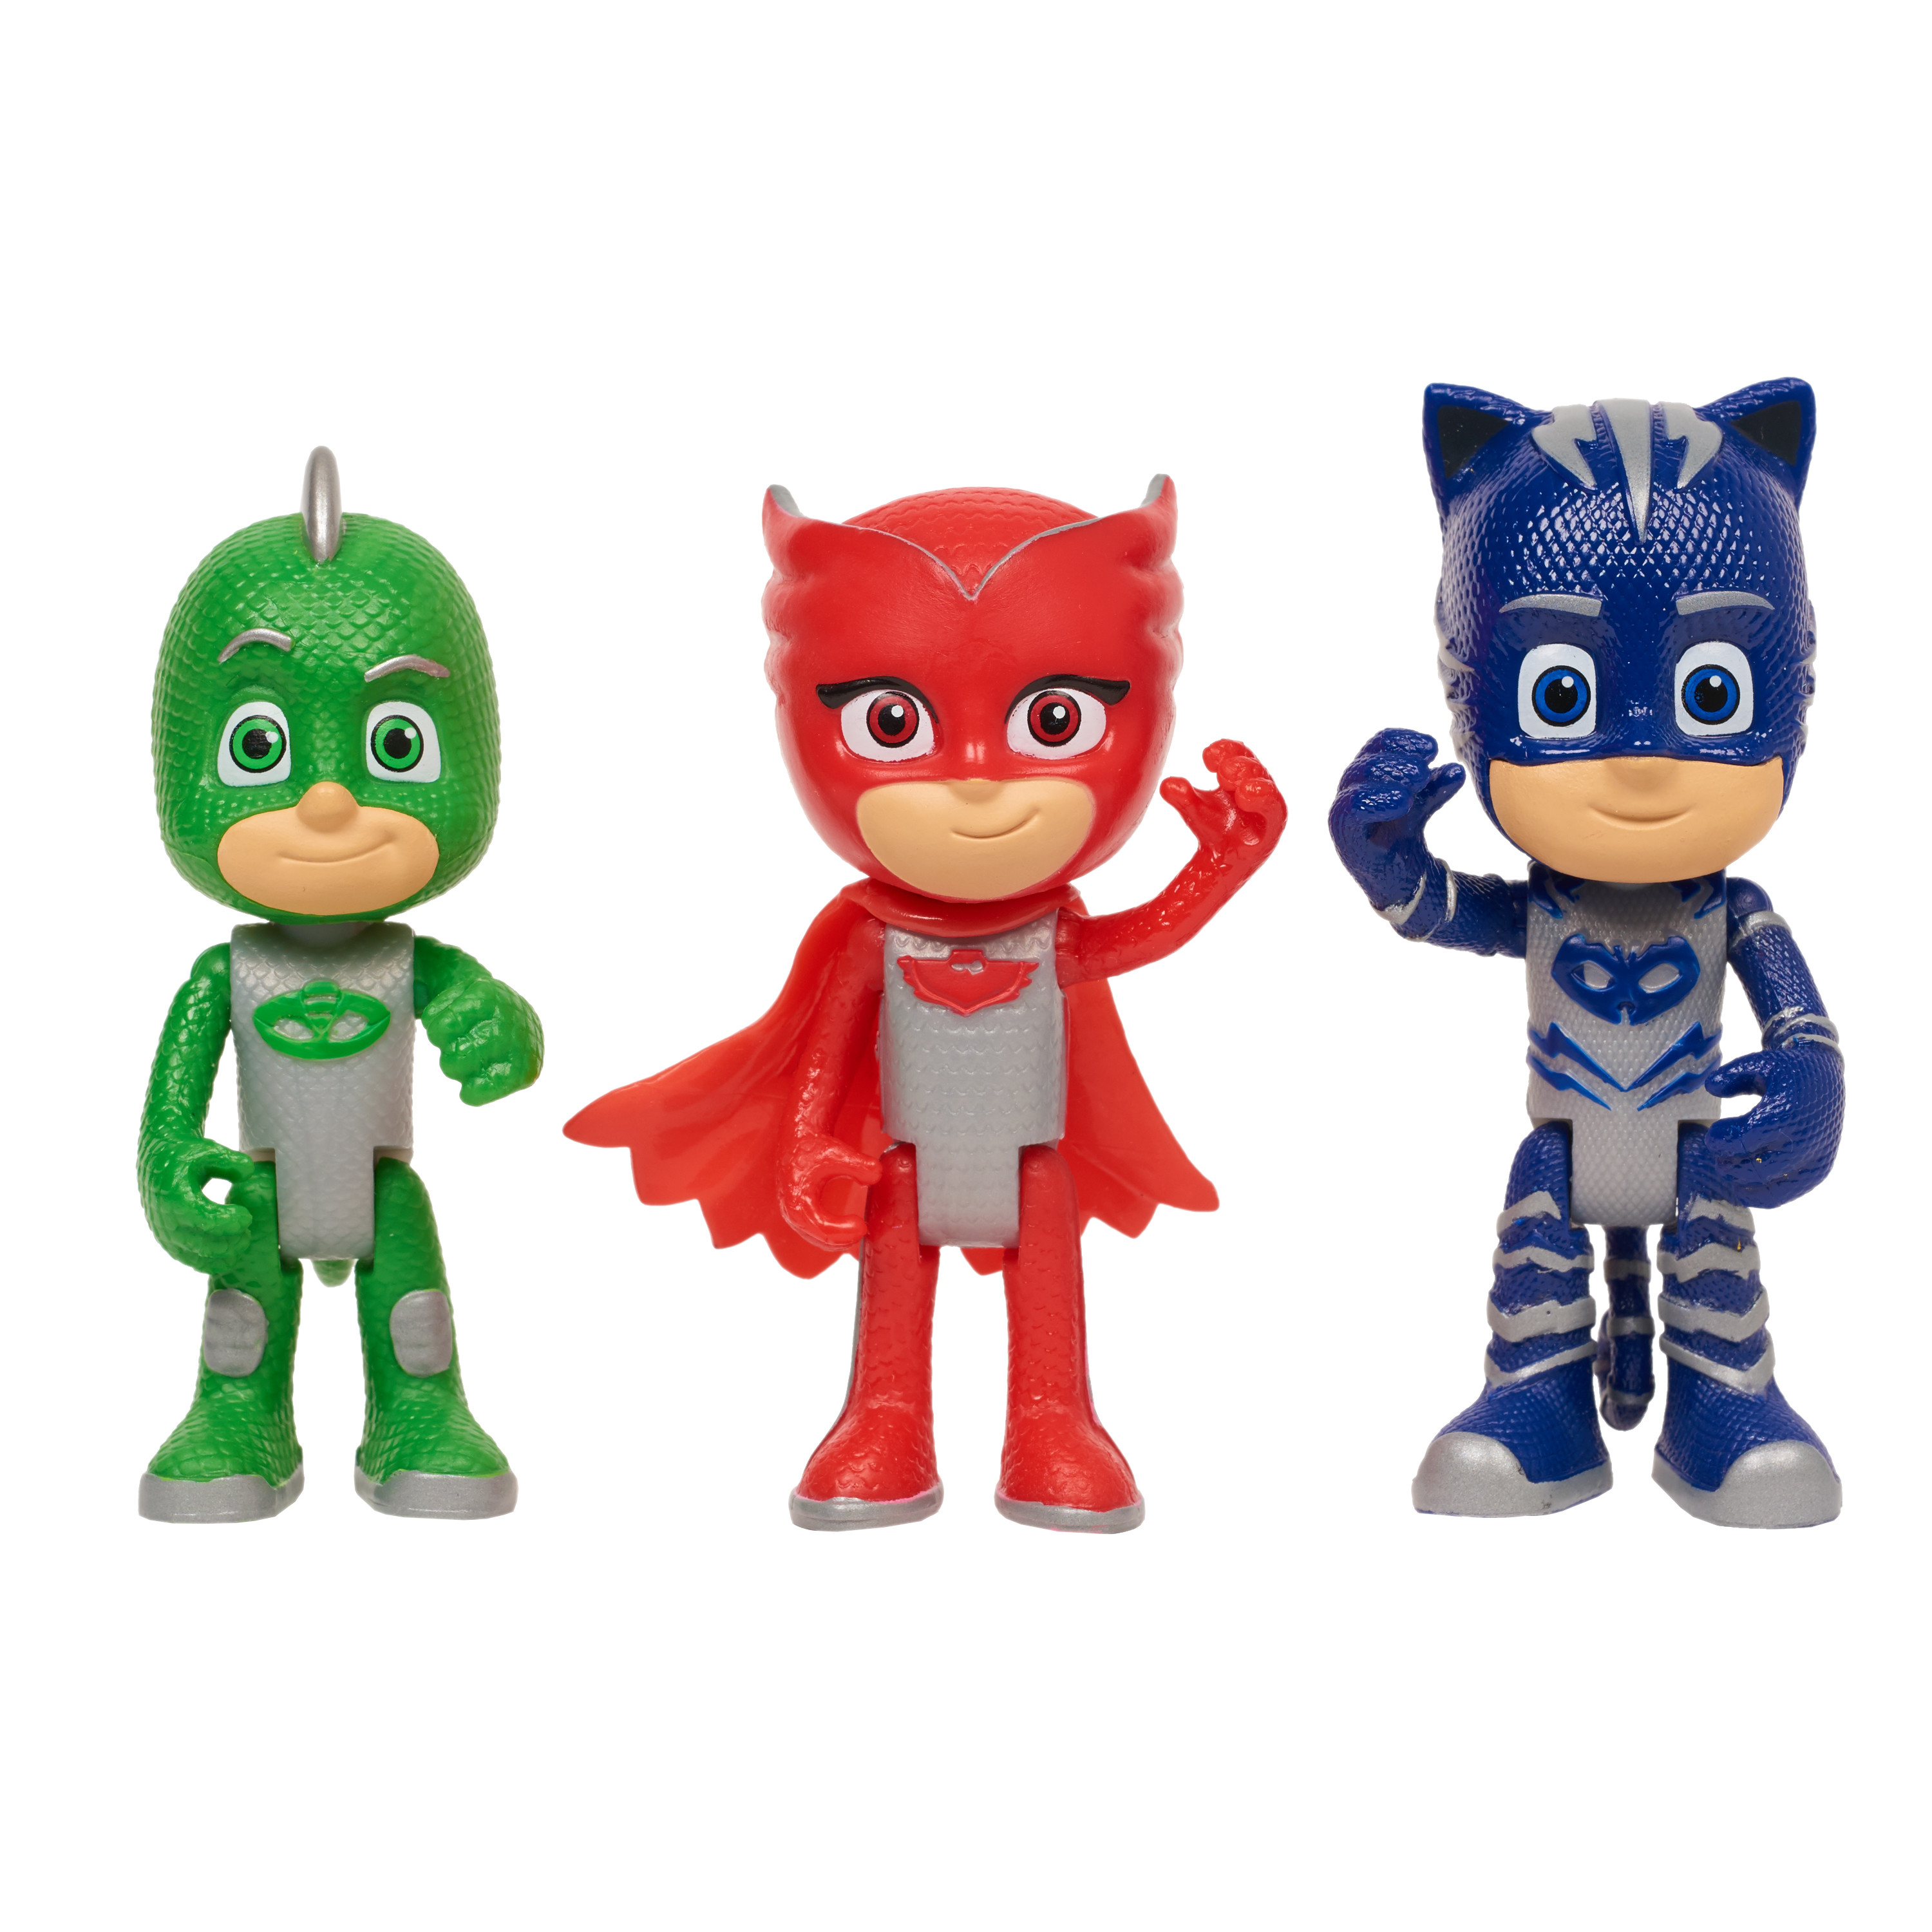 PJ Masks Articulated Figures 3-Pack,  Kids Toys for Ages 3 Up, Gifts and Presents - image 1 of 3